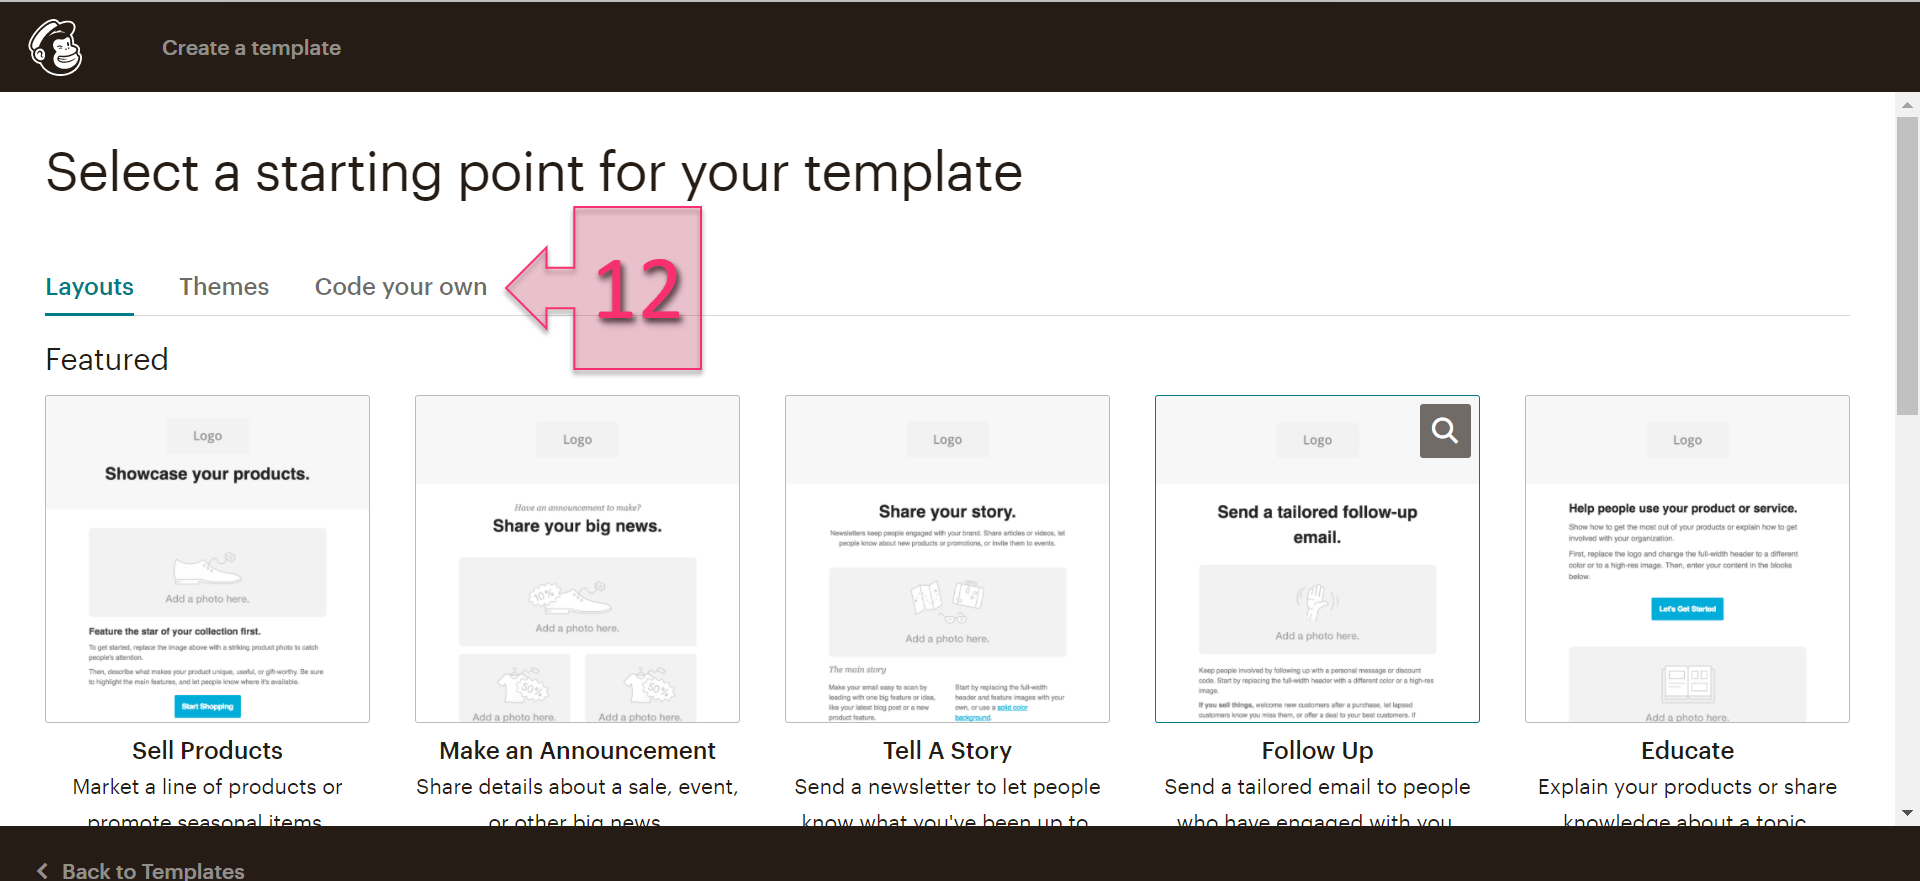 Part 2 - Create a new template from scratch